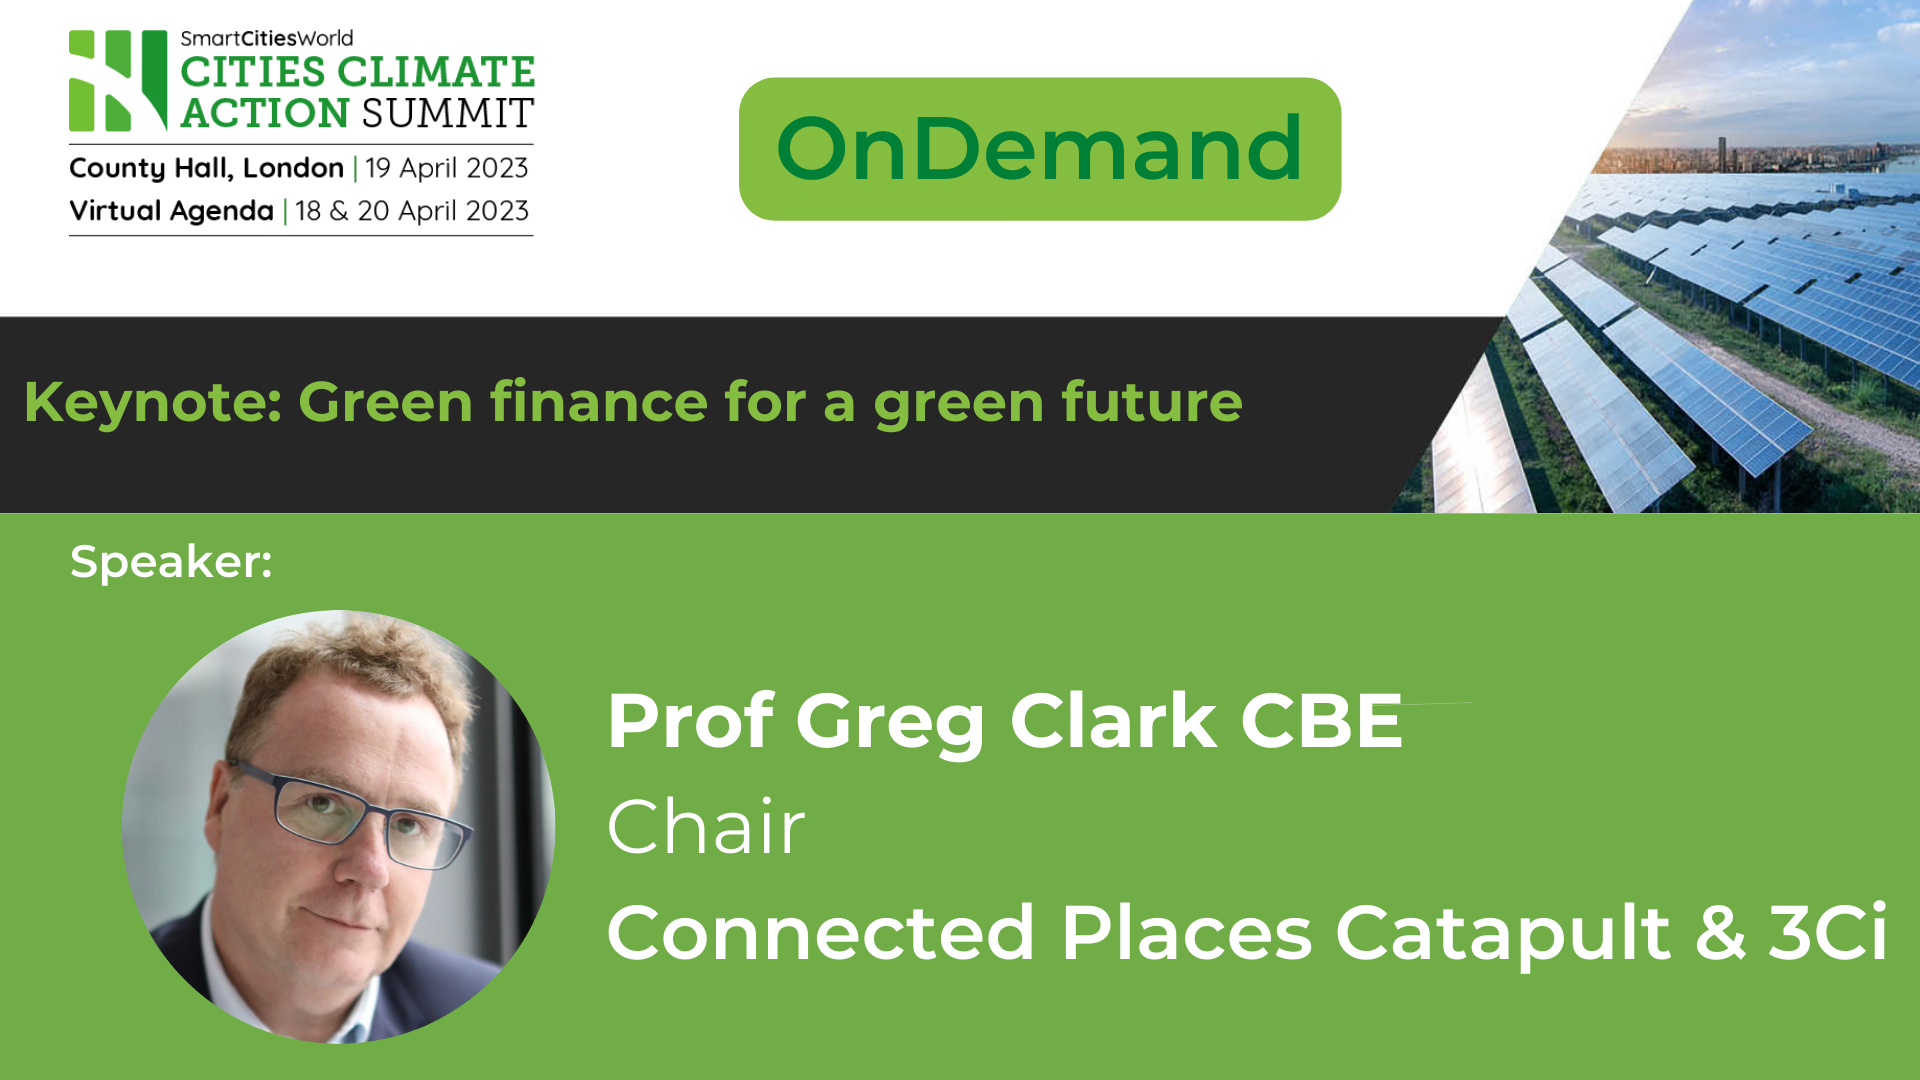 OnDemand Keynote: Greg Clark, Chair, Connected Places Catapult & 3Ci